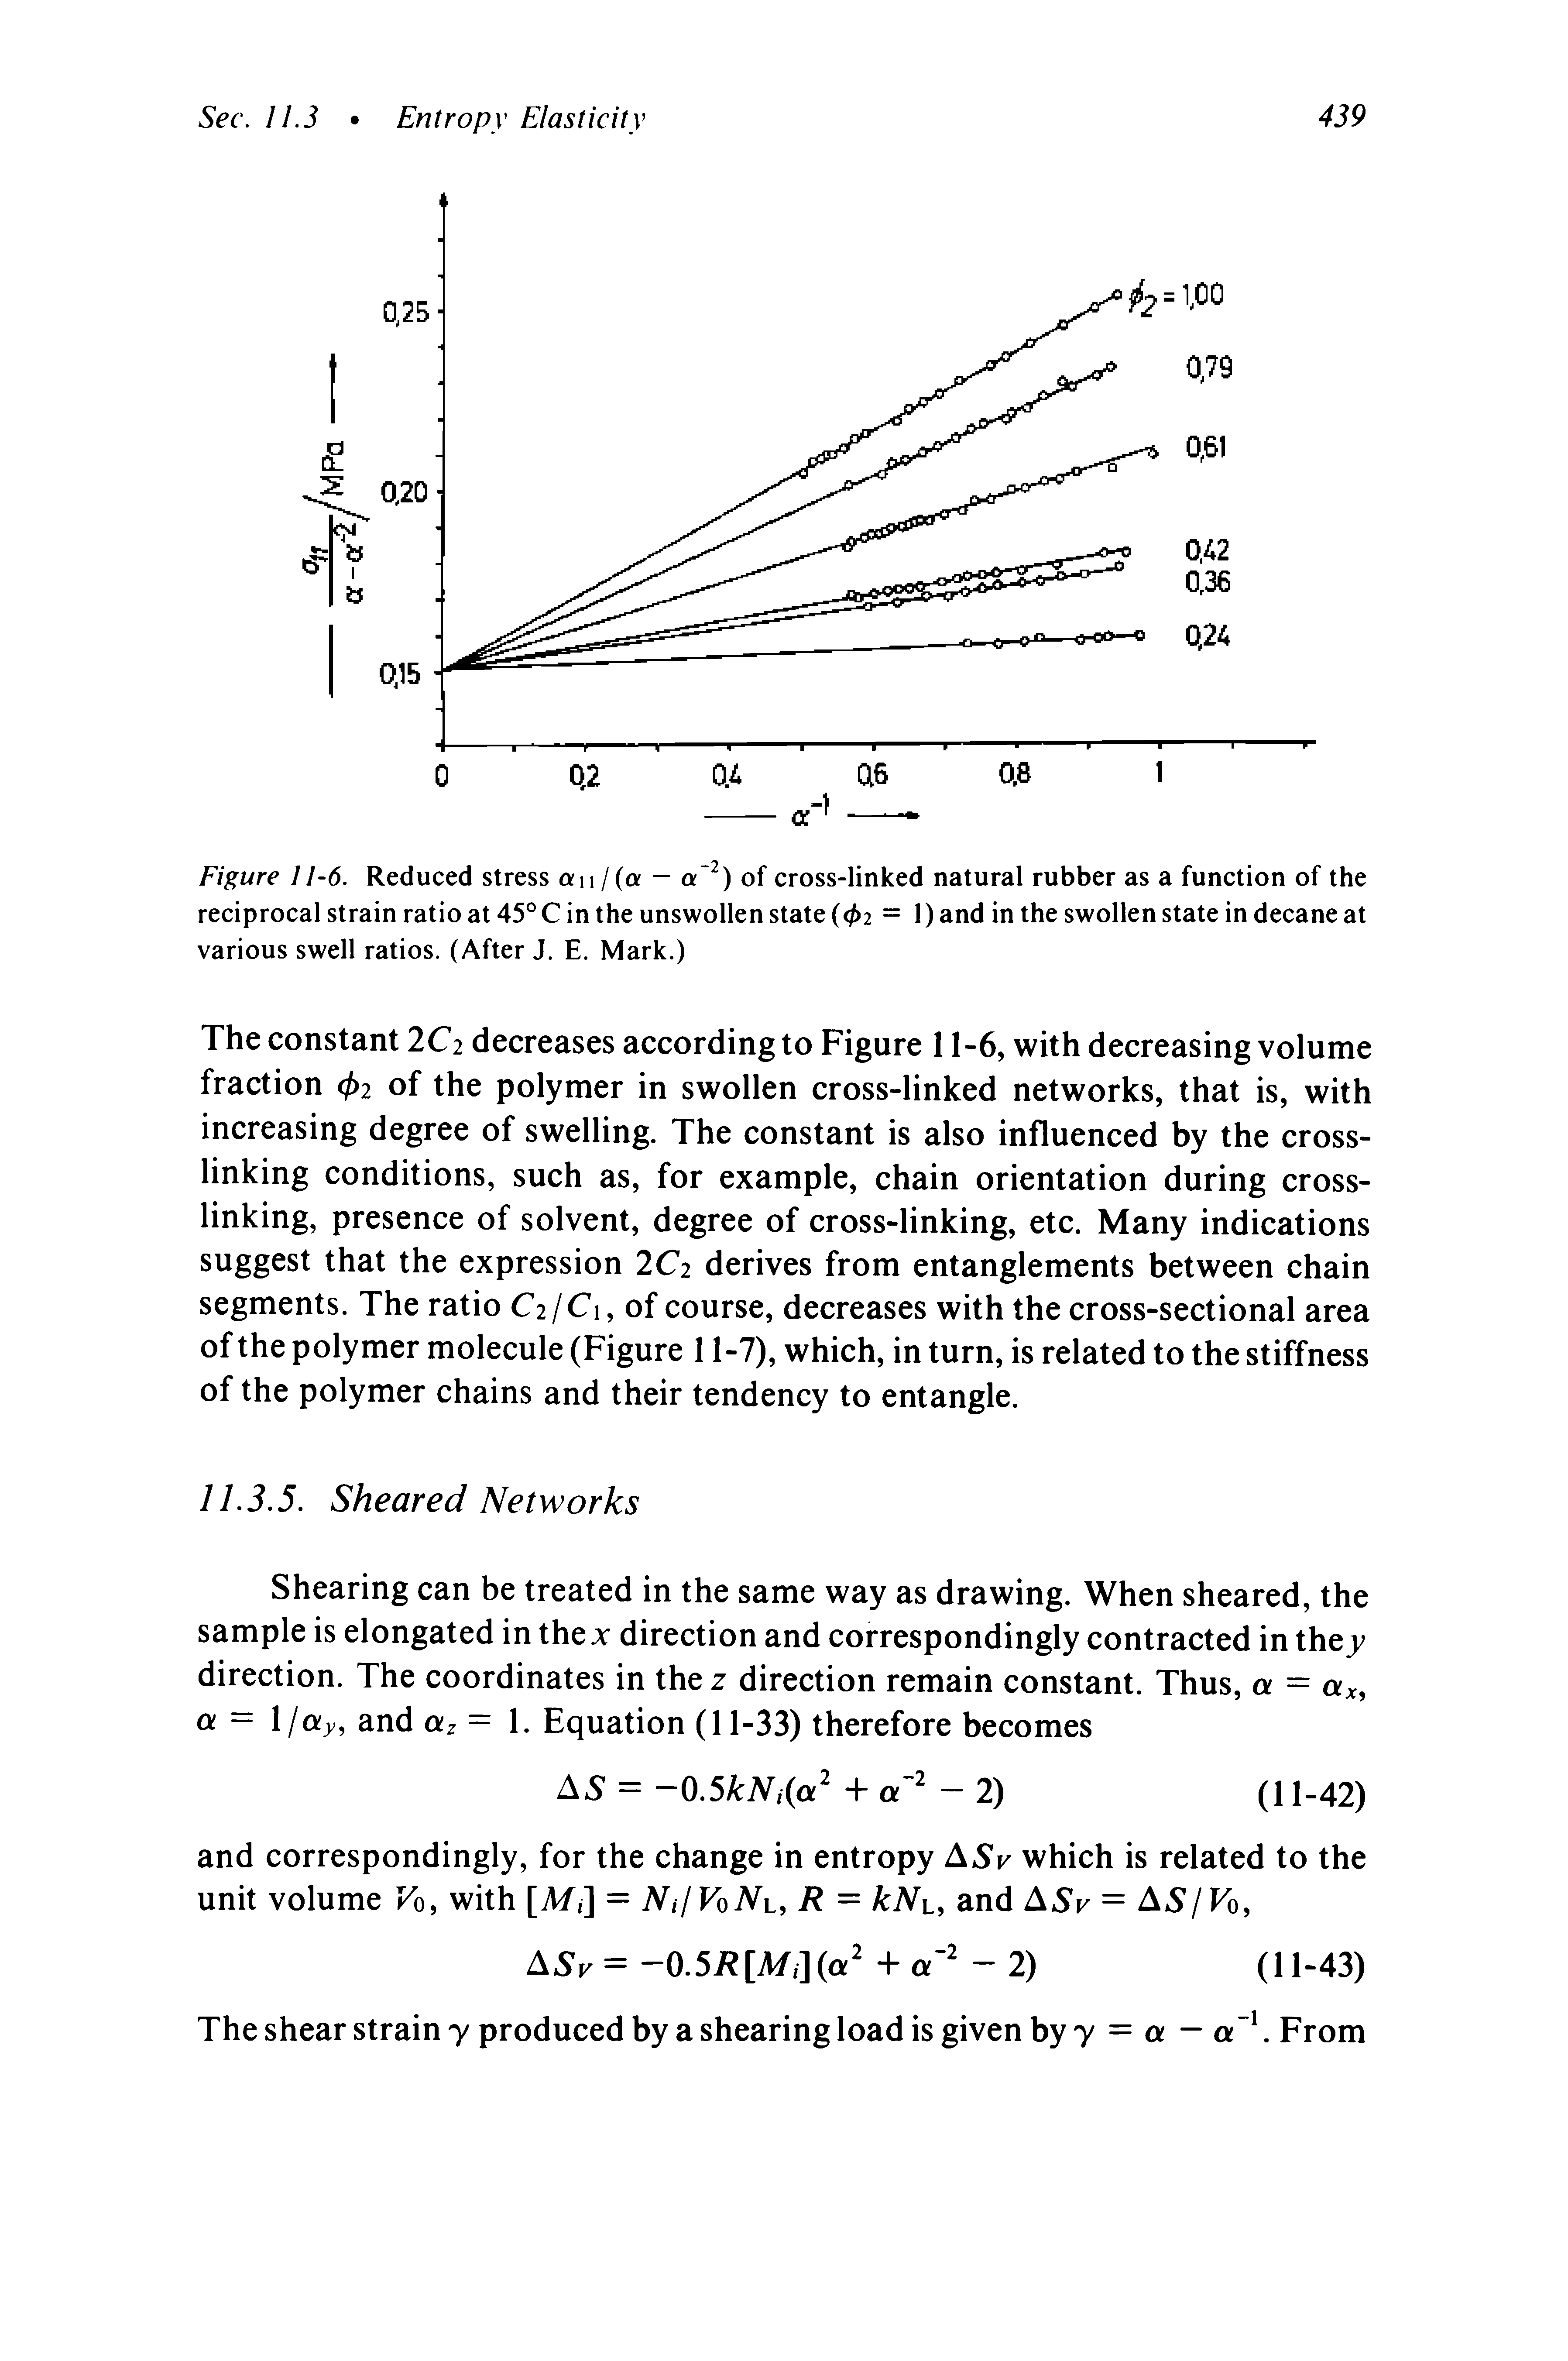 Figure 11-6. Reduced stress aw / (a — a ) of cross-linked natural rubber as a function of the reciprocal strain ratio at 45° C in the unswollen state (02 = 1) and in the swollen state in decane at various swell ratios. (After J. E. Mark.)...